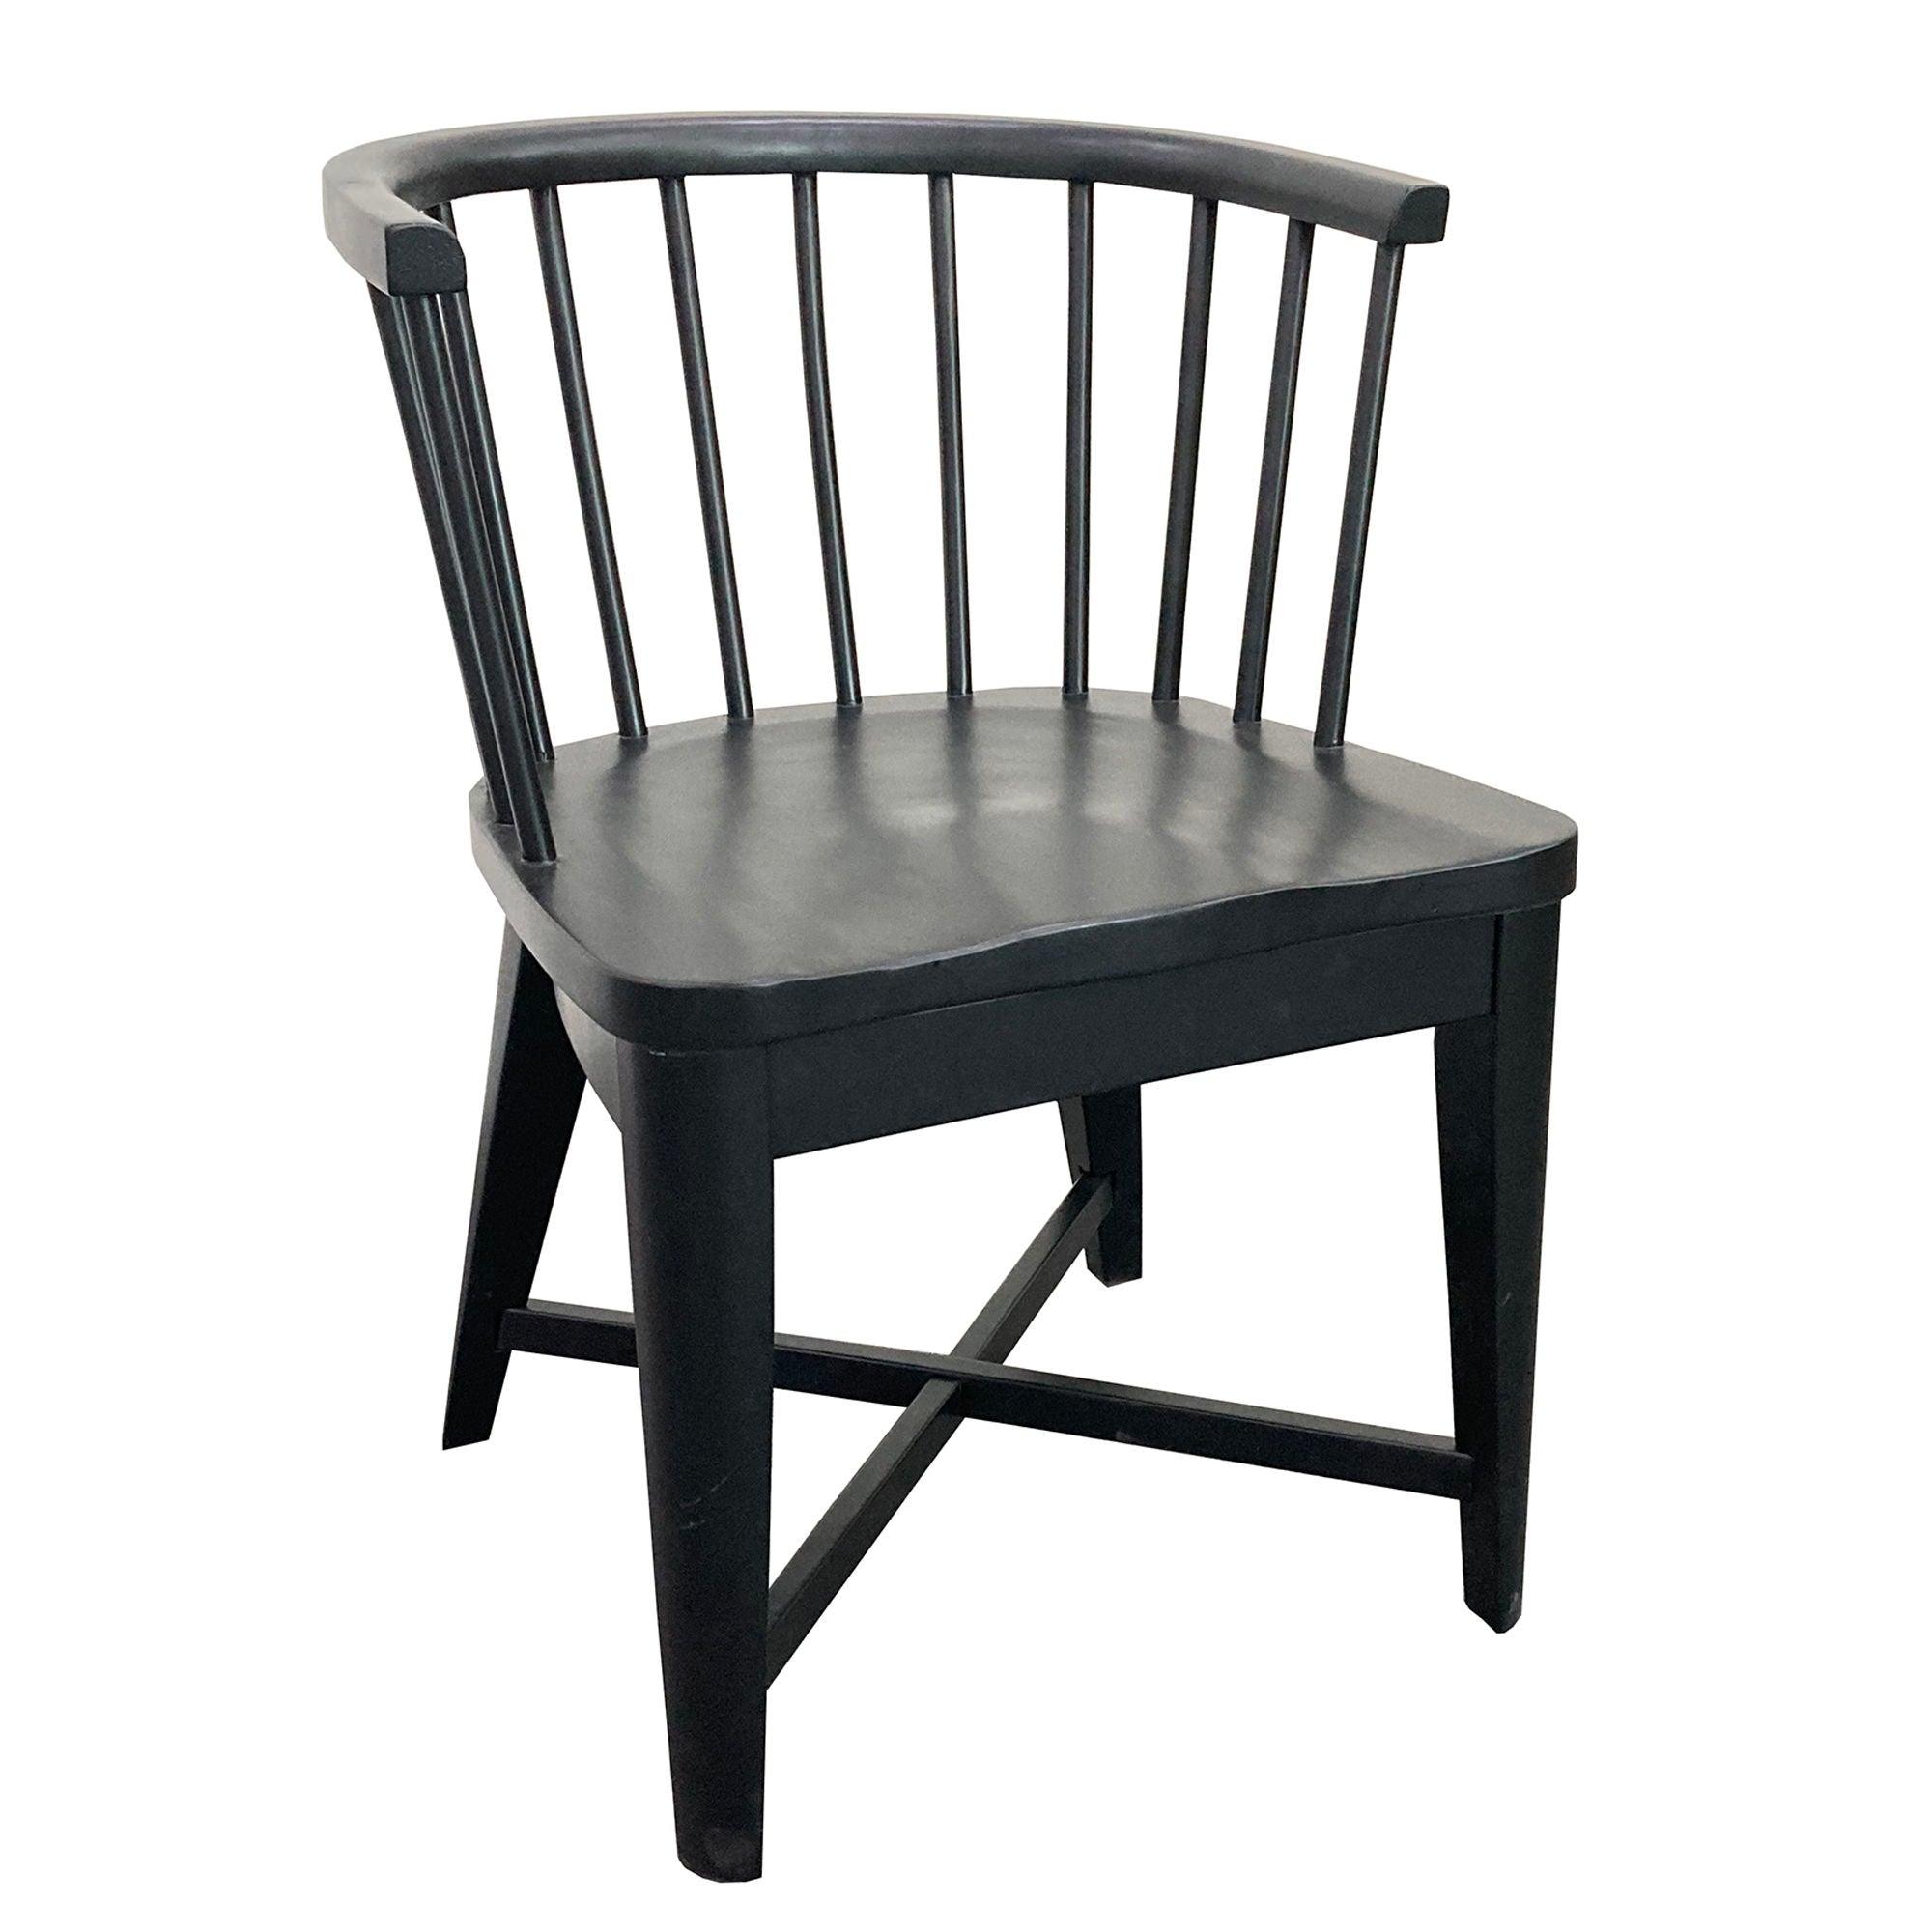 Parker House - Americana Modern Dining - Barrel Dining Chair (Set of 2) - Black - 5th Avenue Furniture